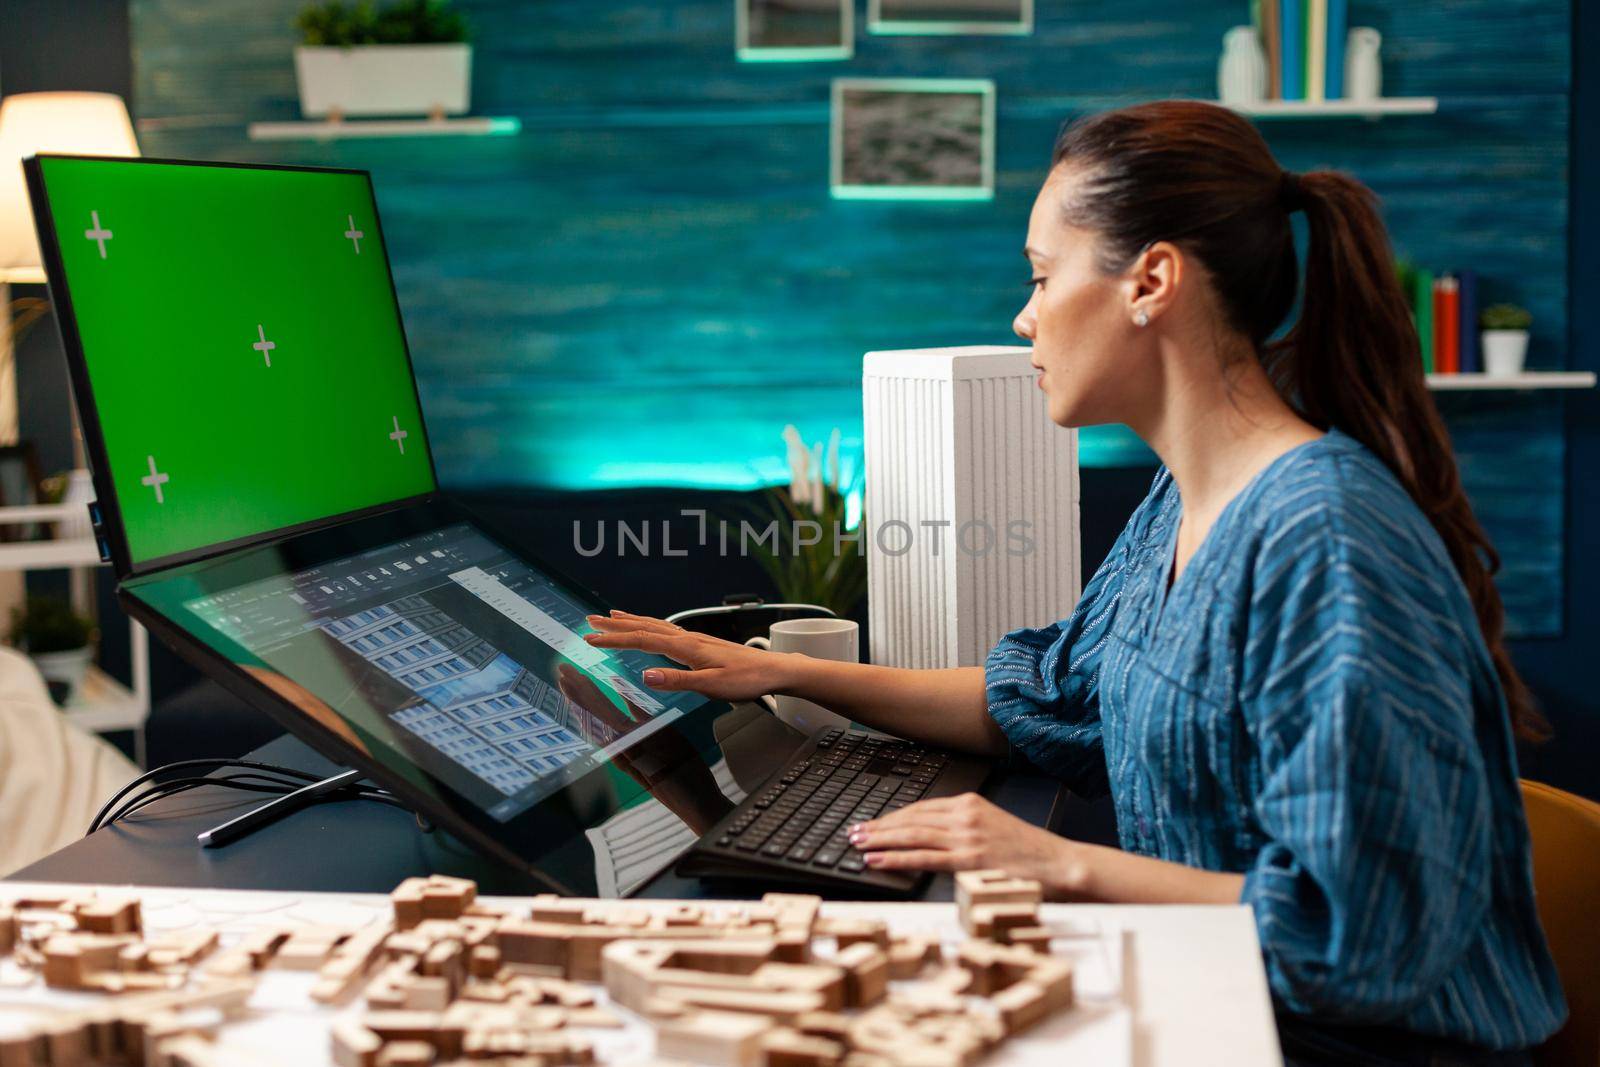 Architecture manager with design plan and green screen on computer monitor using professional equipment and tools. Woman working on blue print with isolated mockup background chroma key